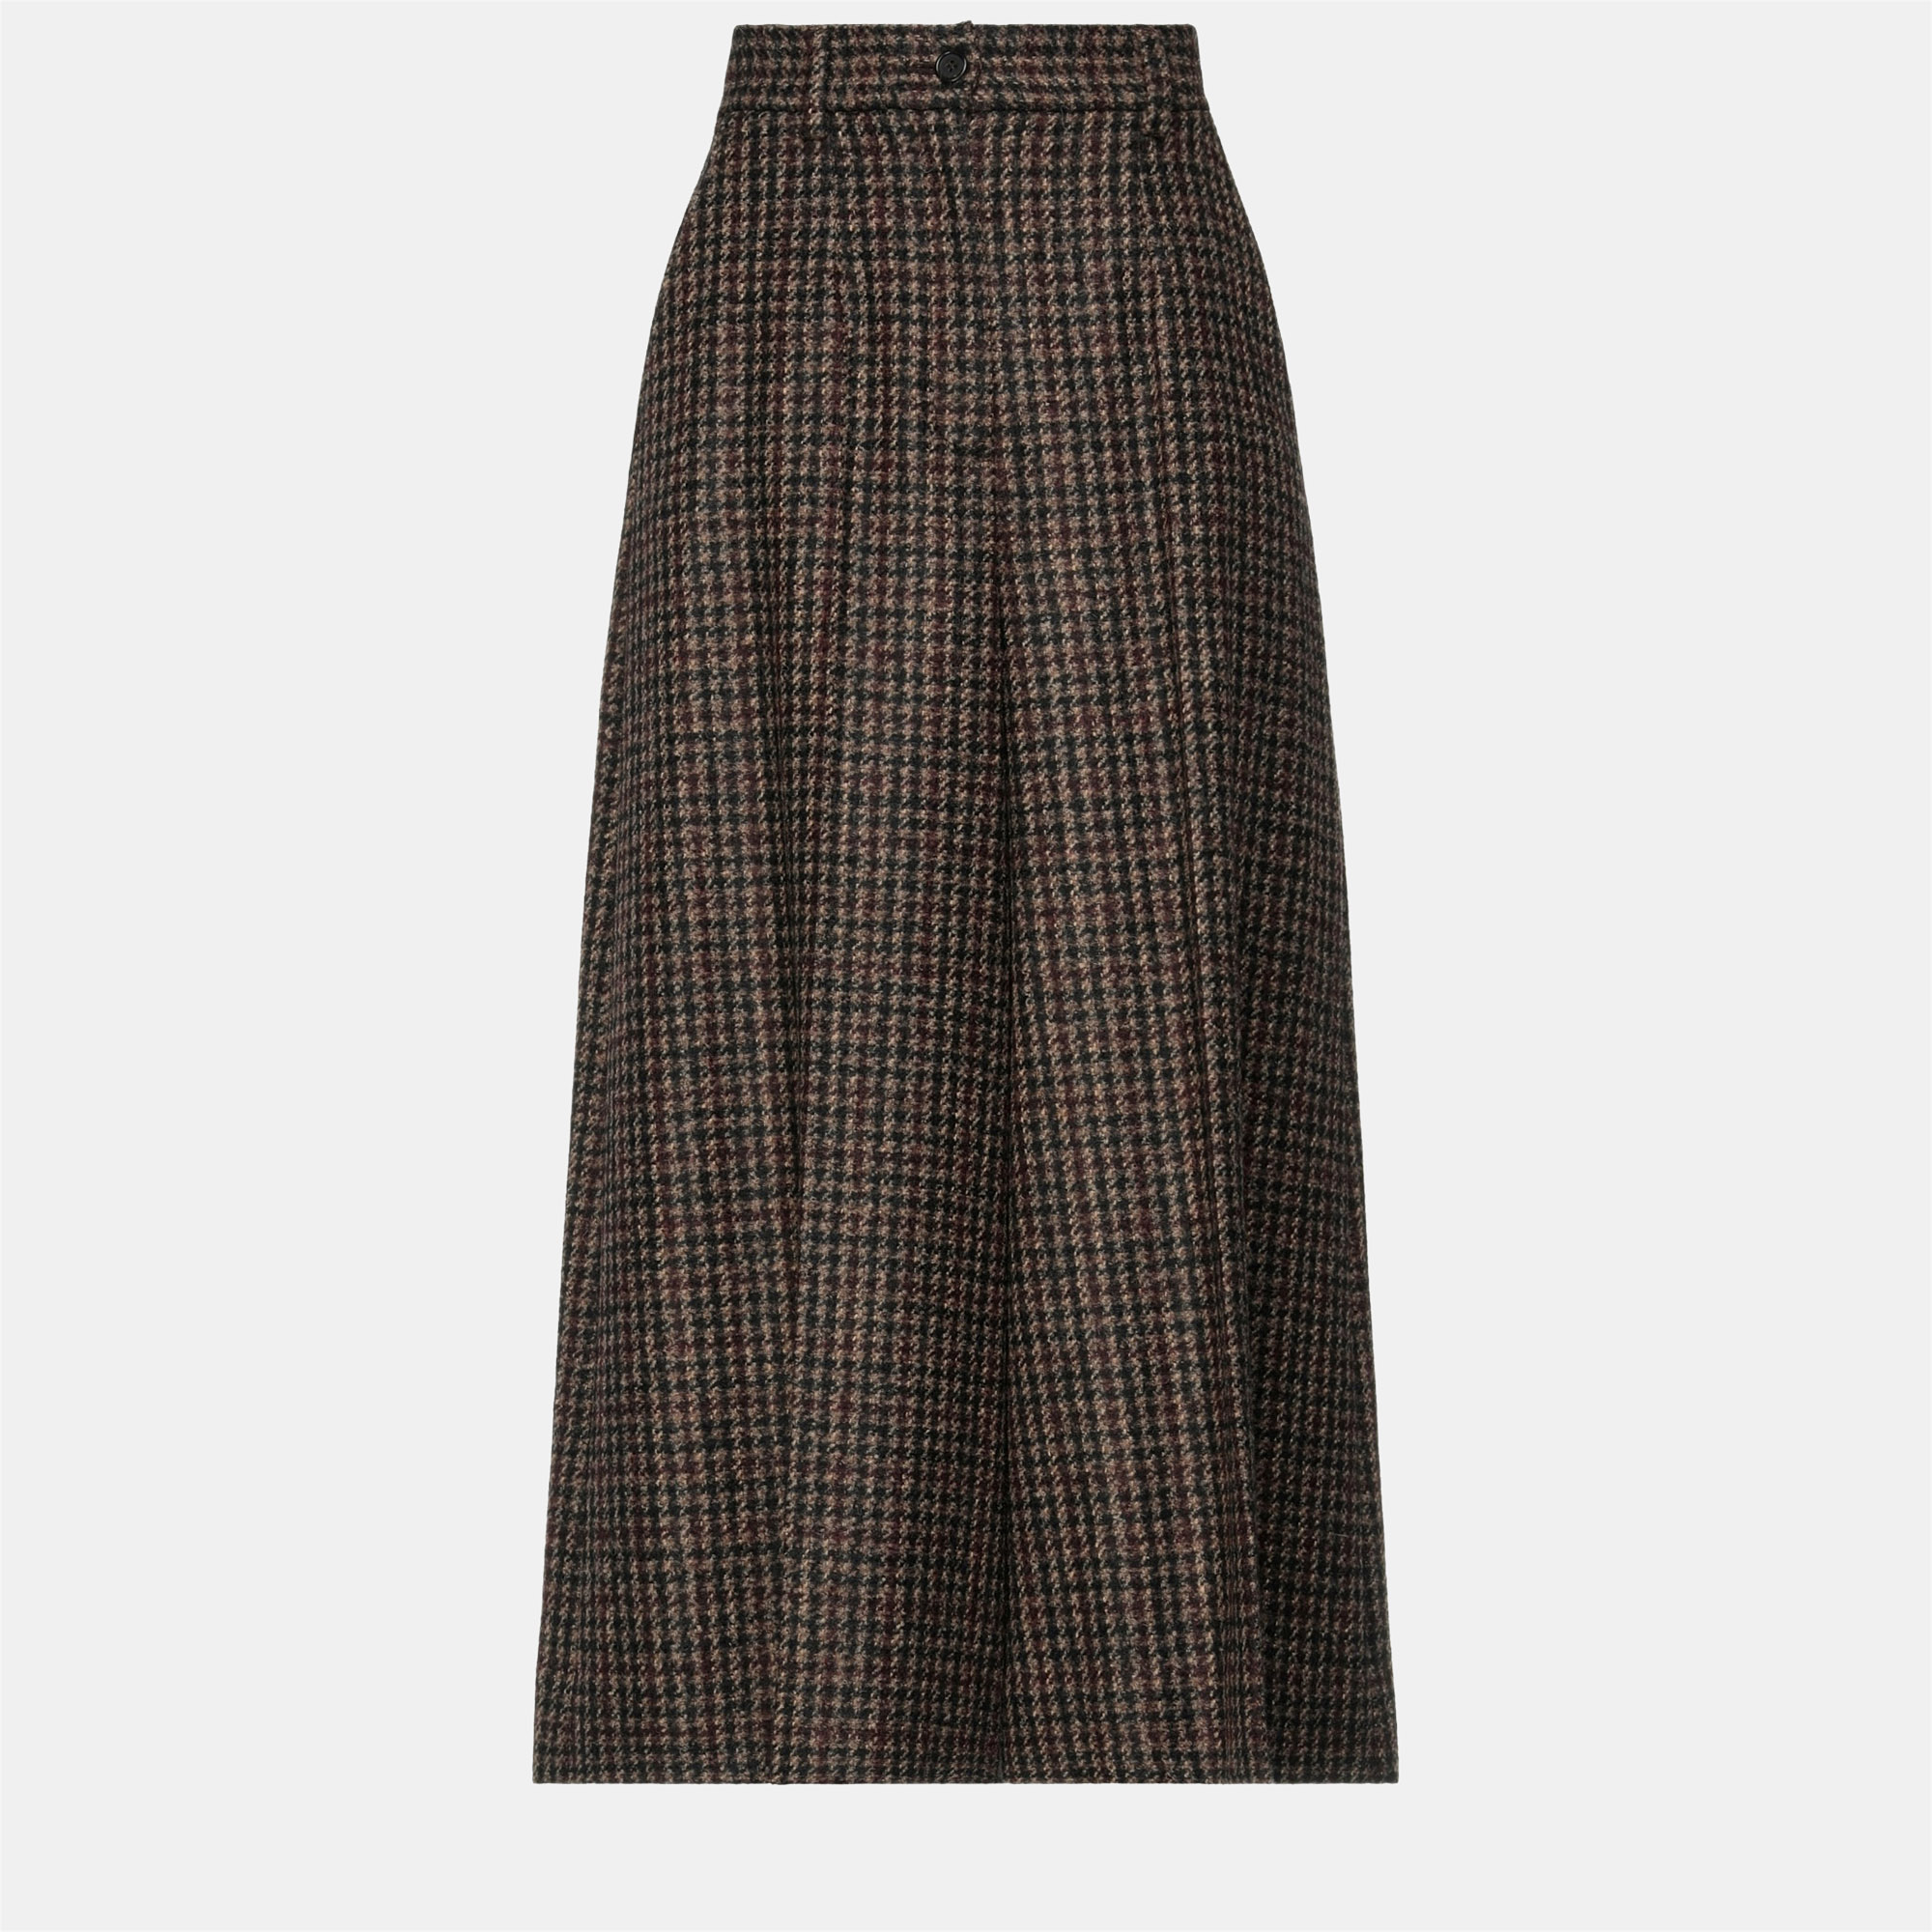 Dolce & gabbana brown houndstooth wool culottes size 40